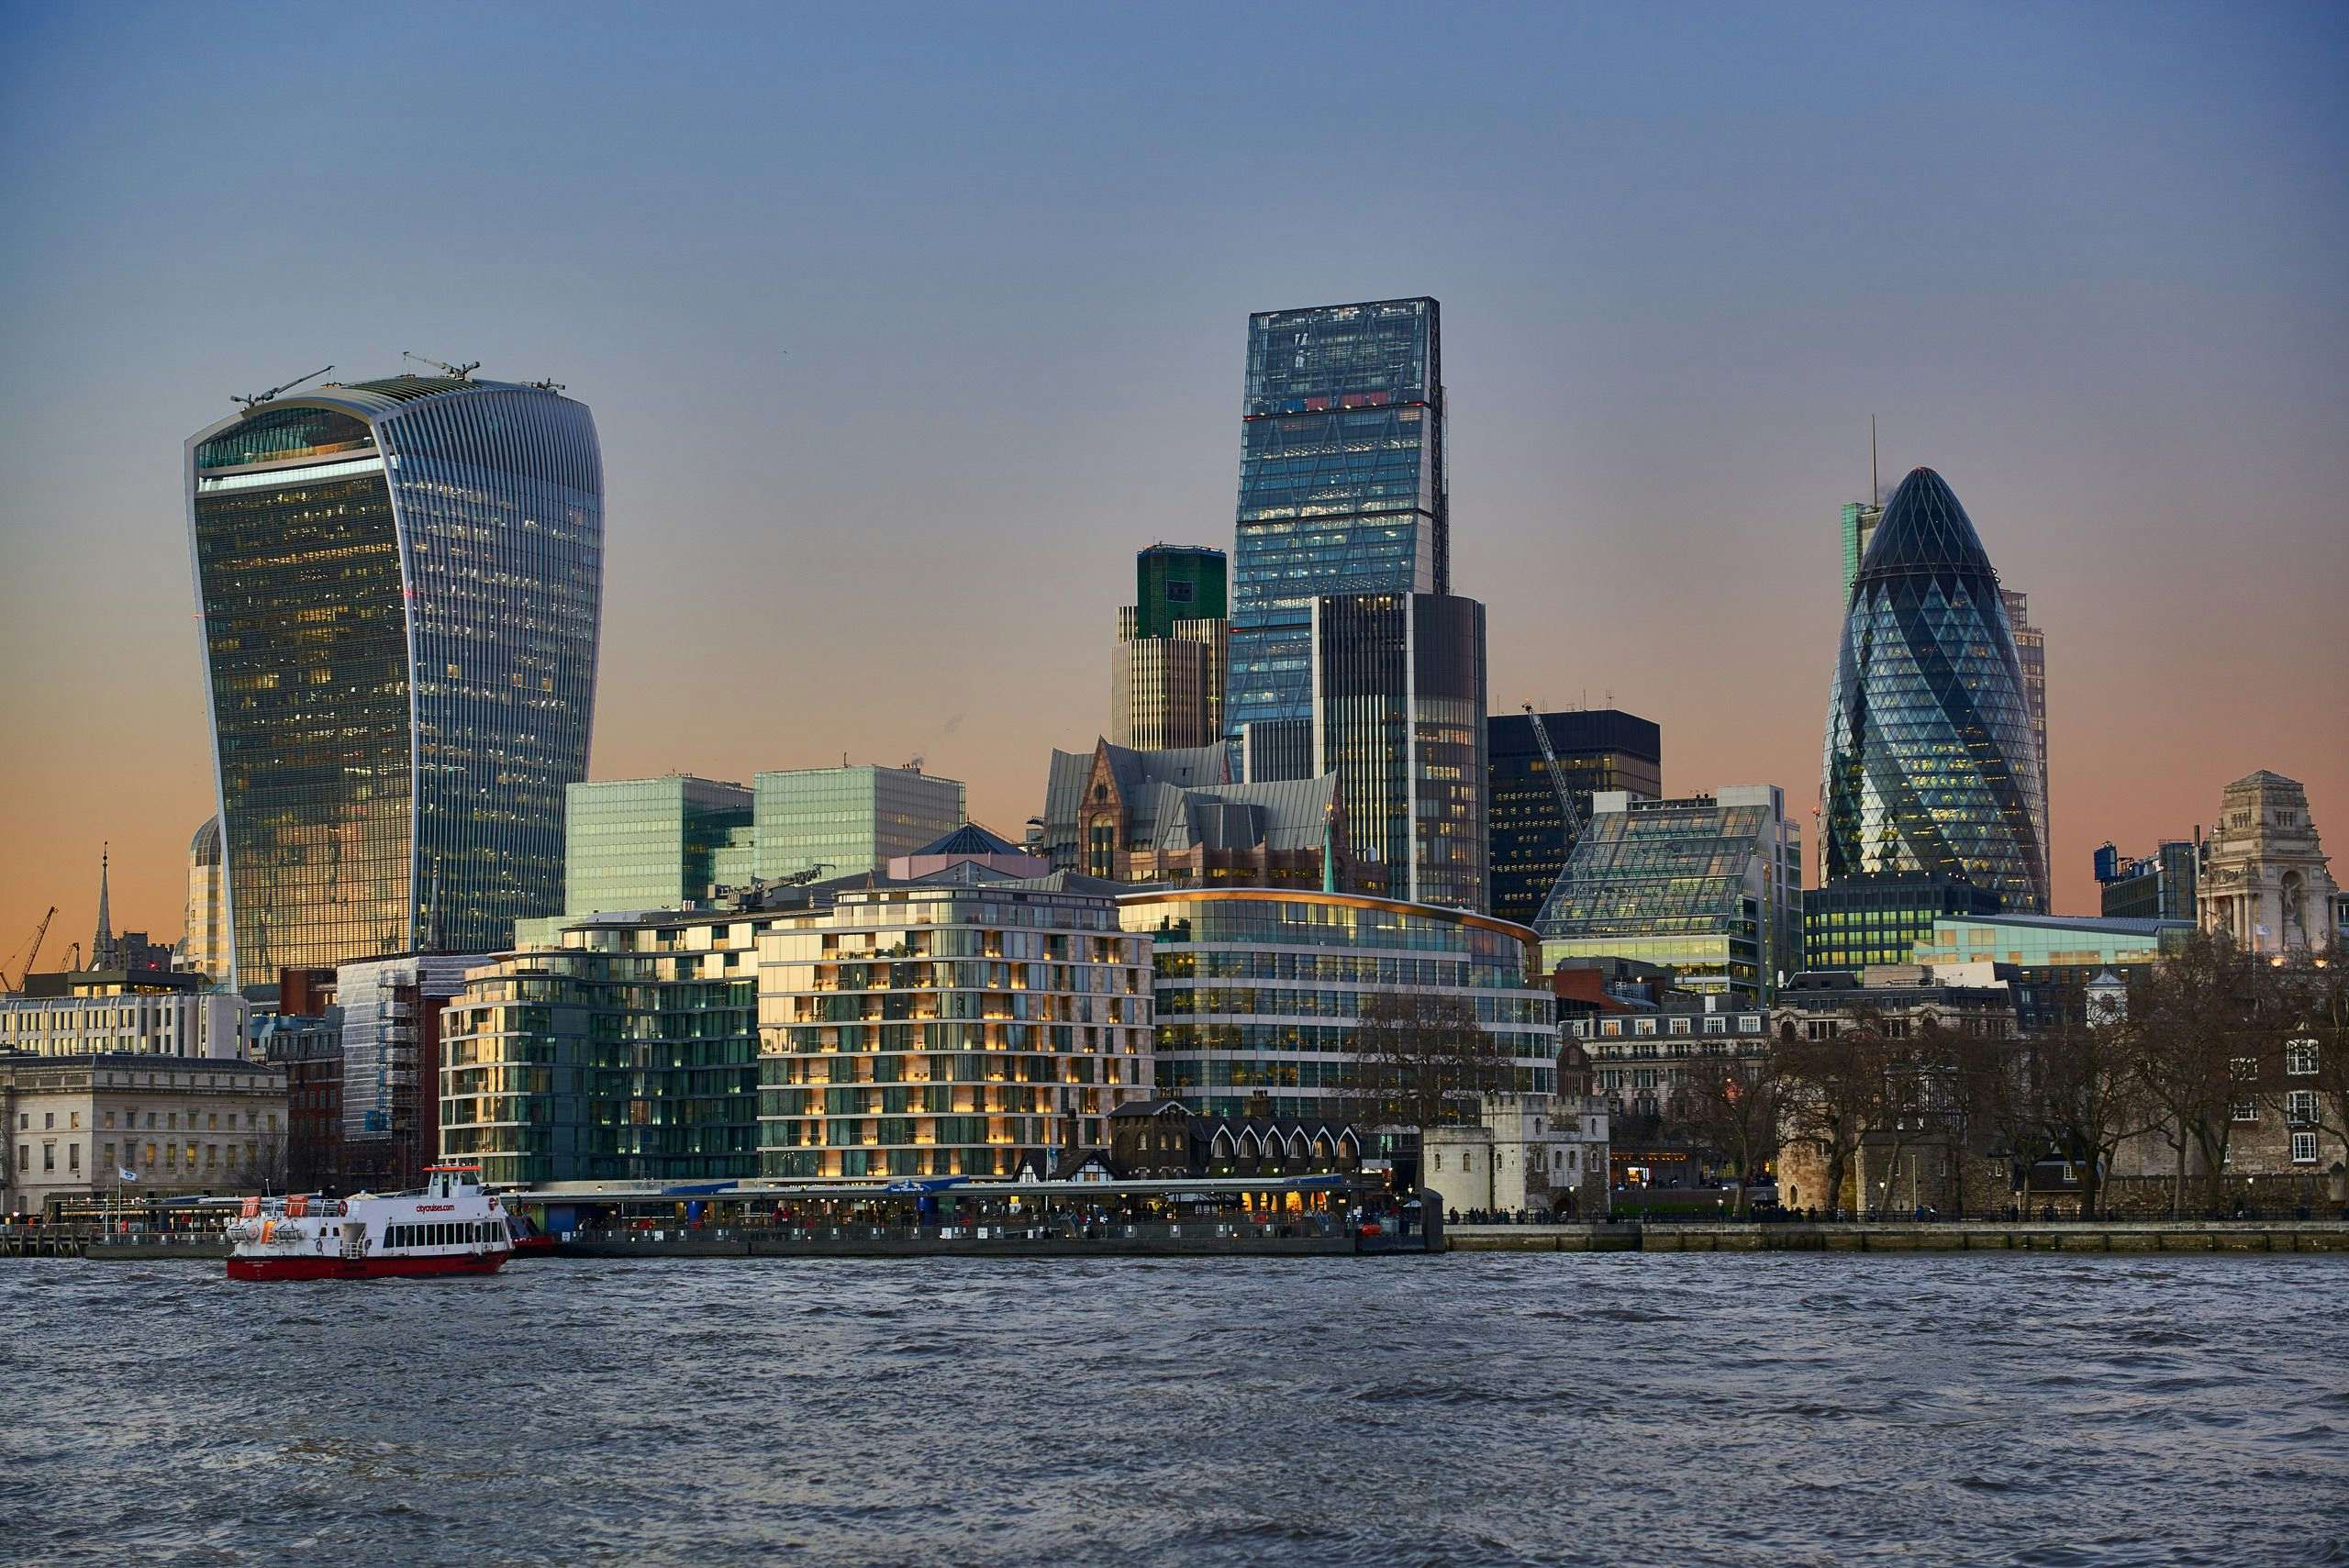 London winter views. The City skyline from across River Thames.